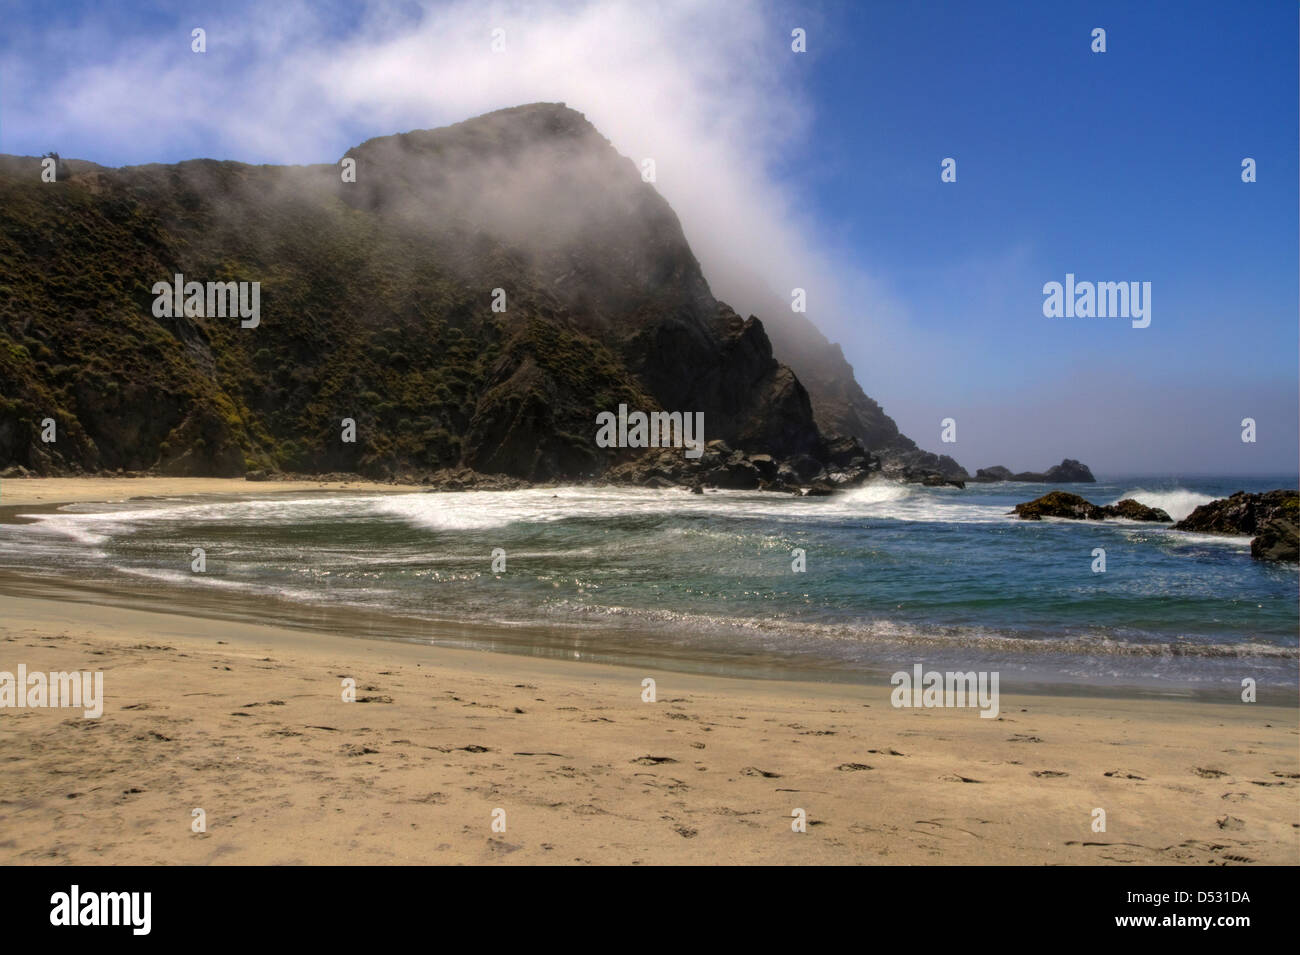 Coastline &cliffs shrouded in mist at Pfeiffer Beach in the Julia Pfeiffer Big Sur State Park, California, USA in January Stock Photo